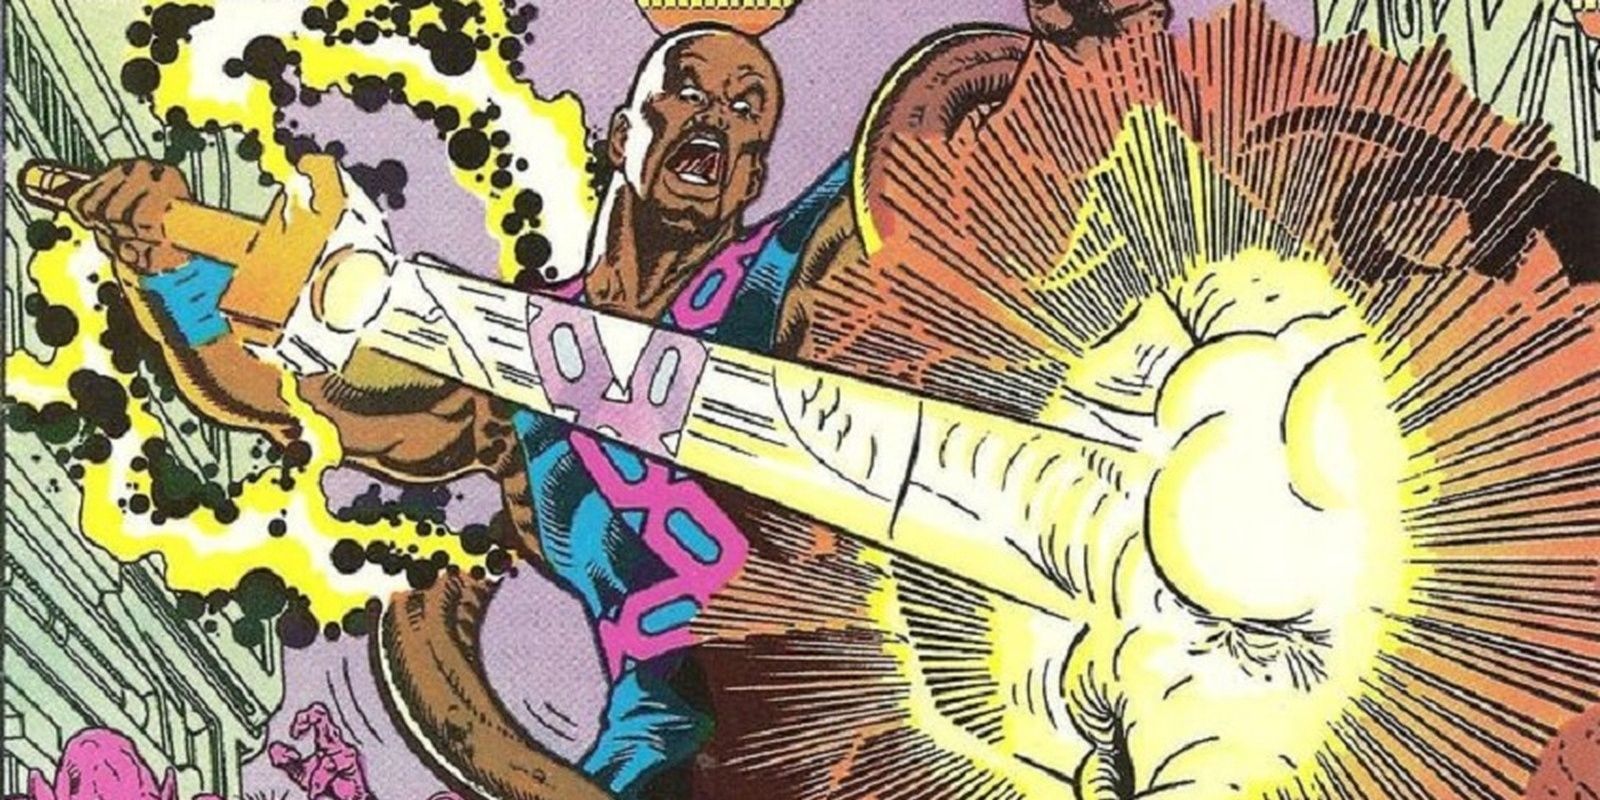 Phaestos shooting energy from his hammer in Marvel Comics